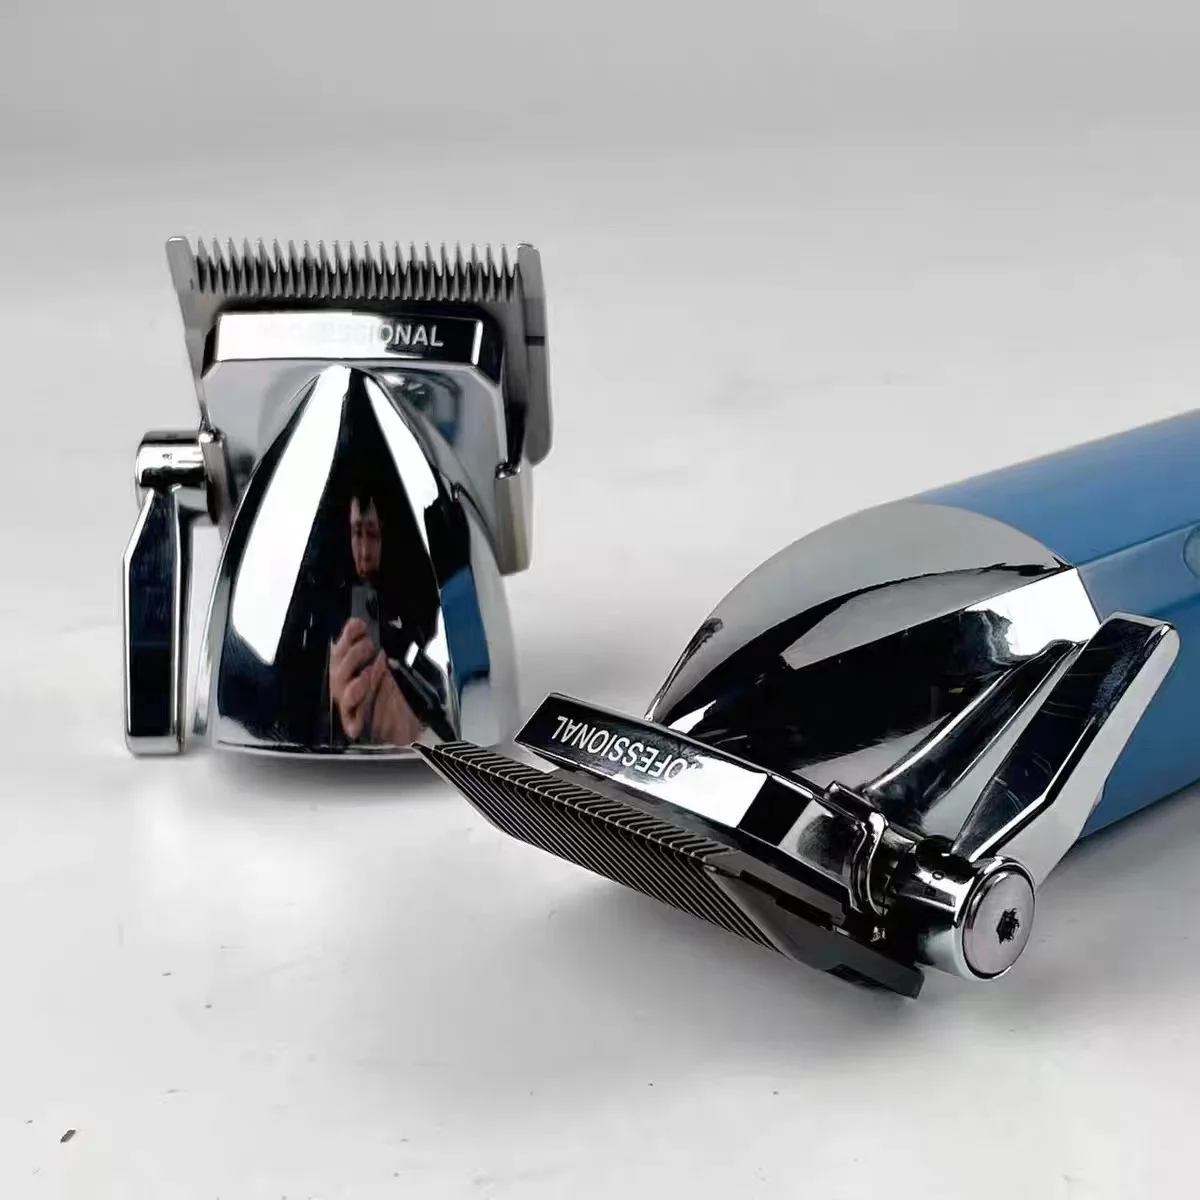 BiLLPRO BL600 BL800 Professional Barber Electric Push Hair Clipper Oil Head  Gradient Engraving Head Whitening Device Shaver Tool - AliExpress